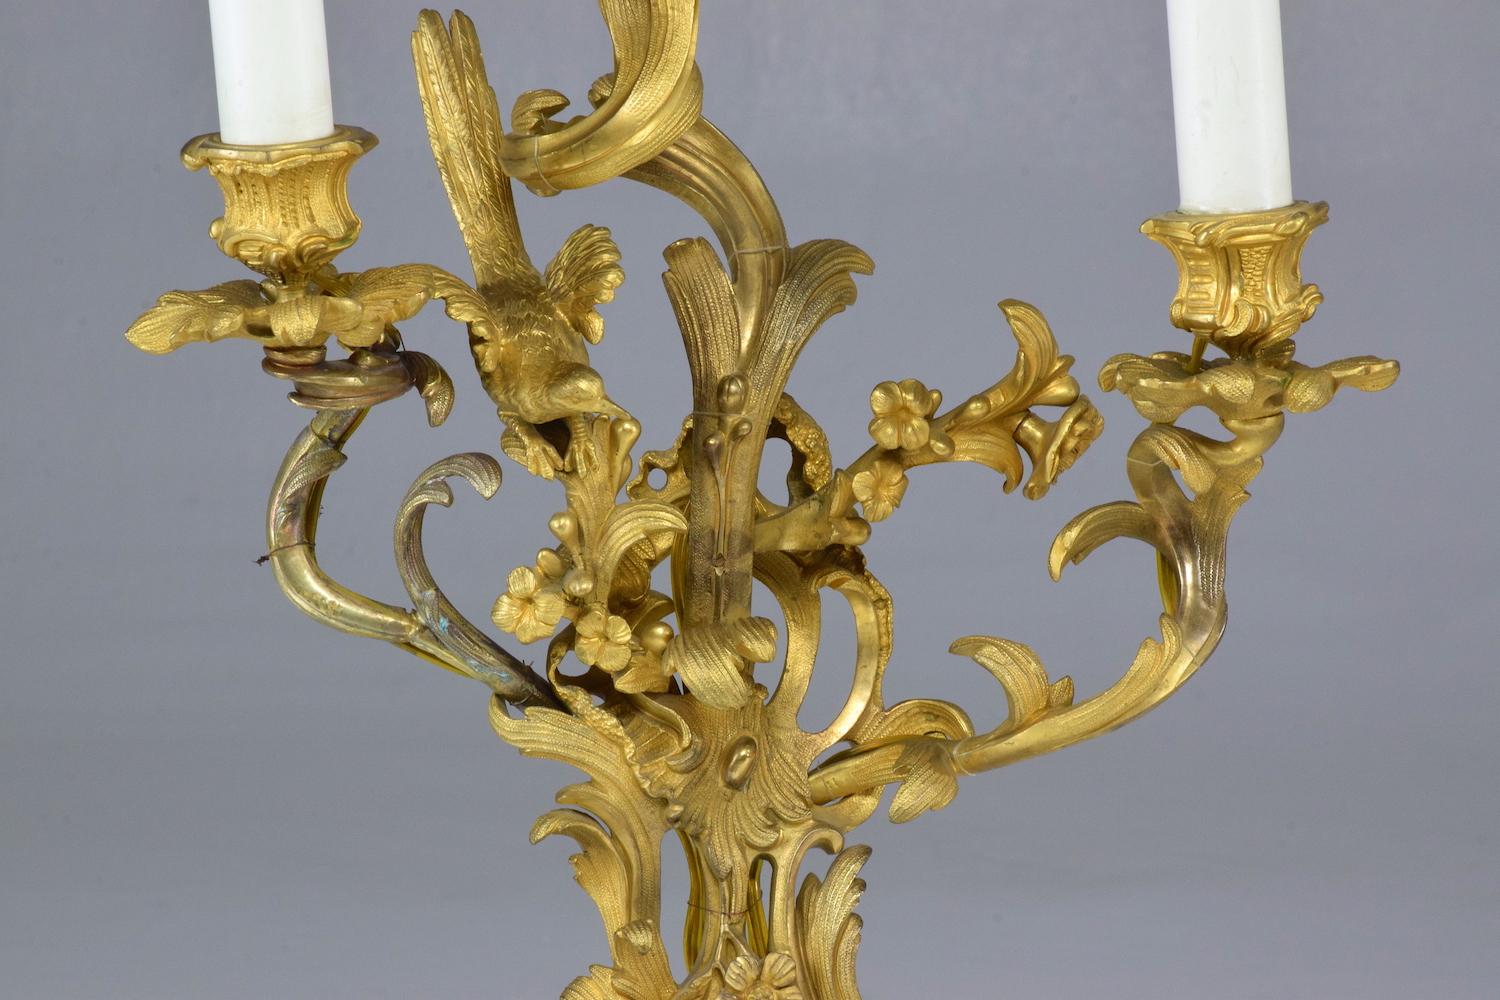  French Pair of Antique Louis VXI Ormolu Electrified Candelabras  5